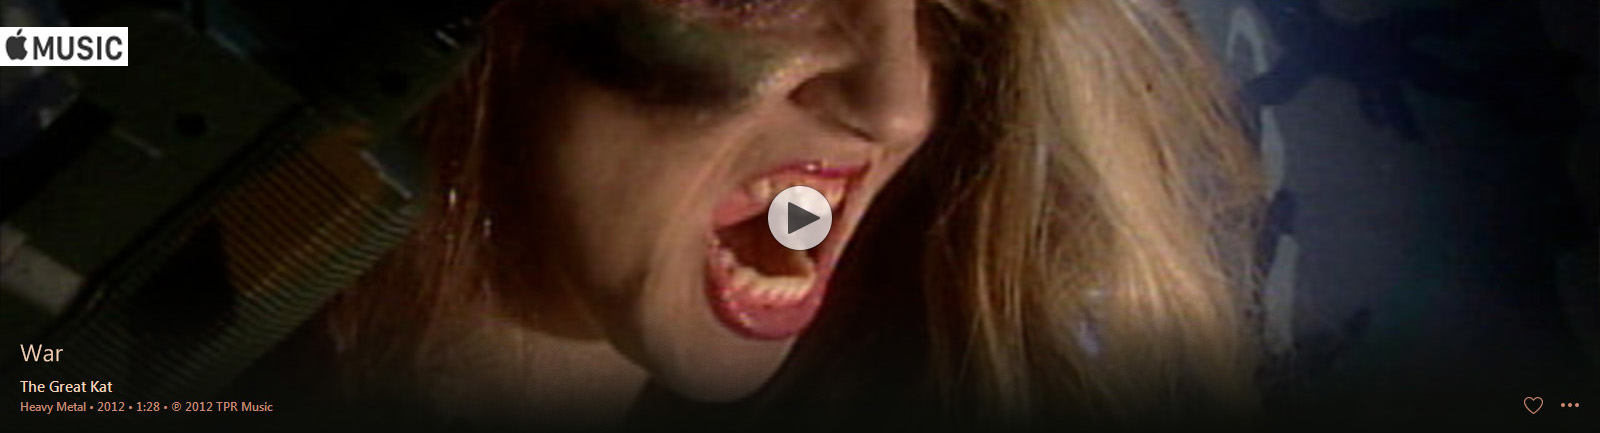 APPLE MUSIC is NOW STREAMING The Great Kat's "WAR" MUSIC VIDEO!